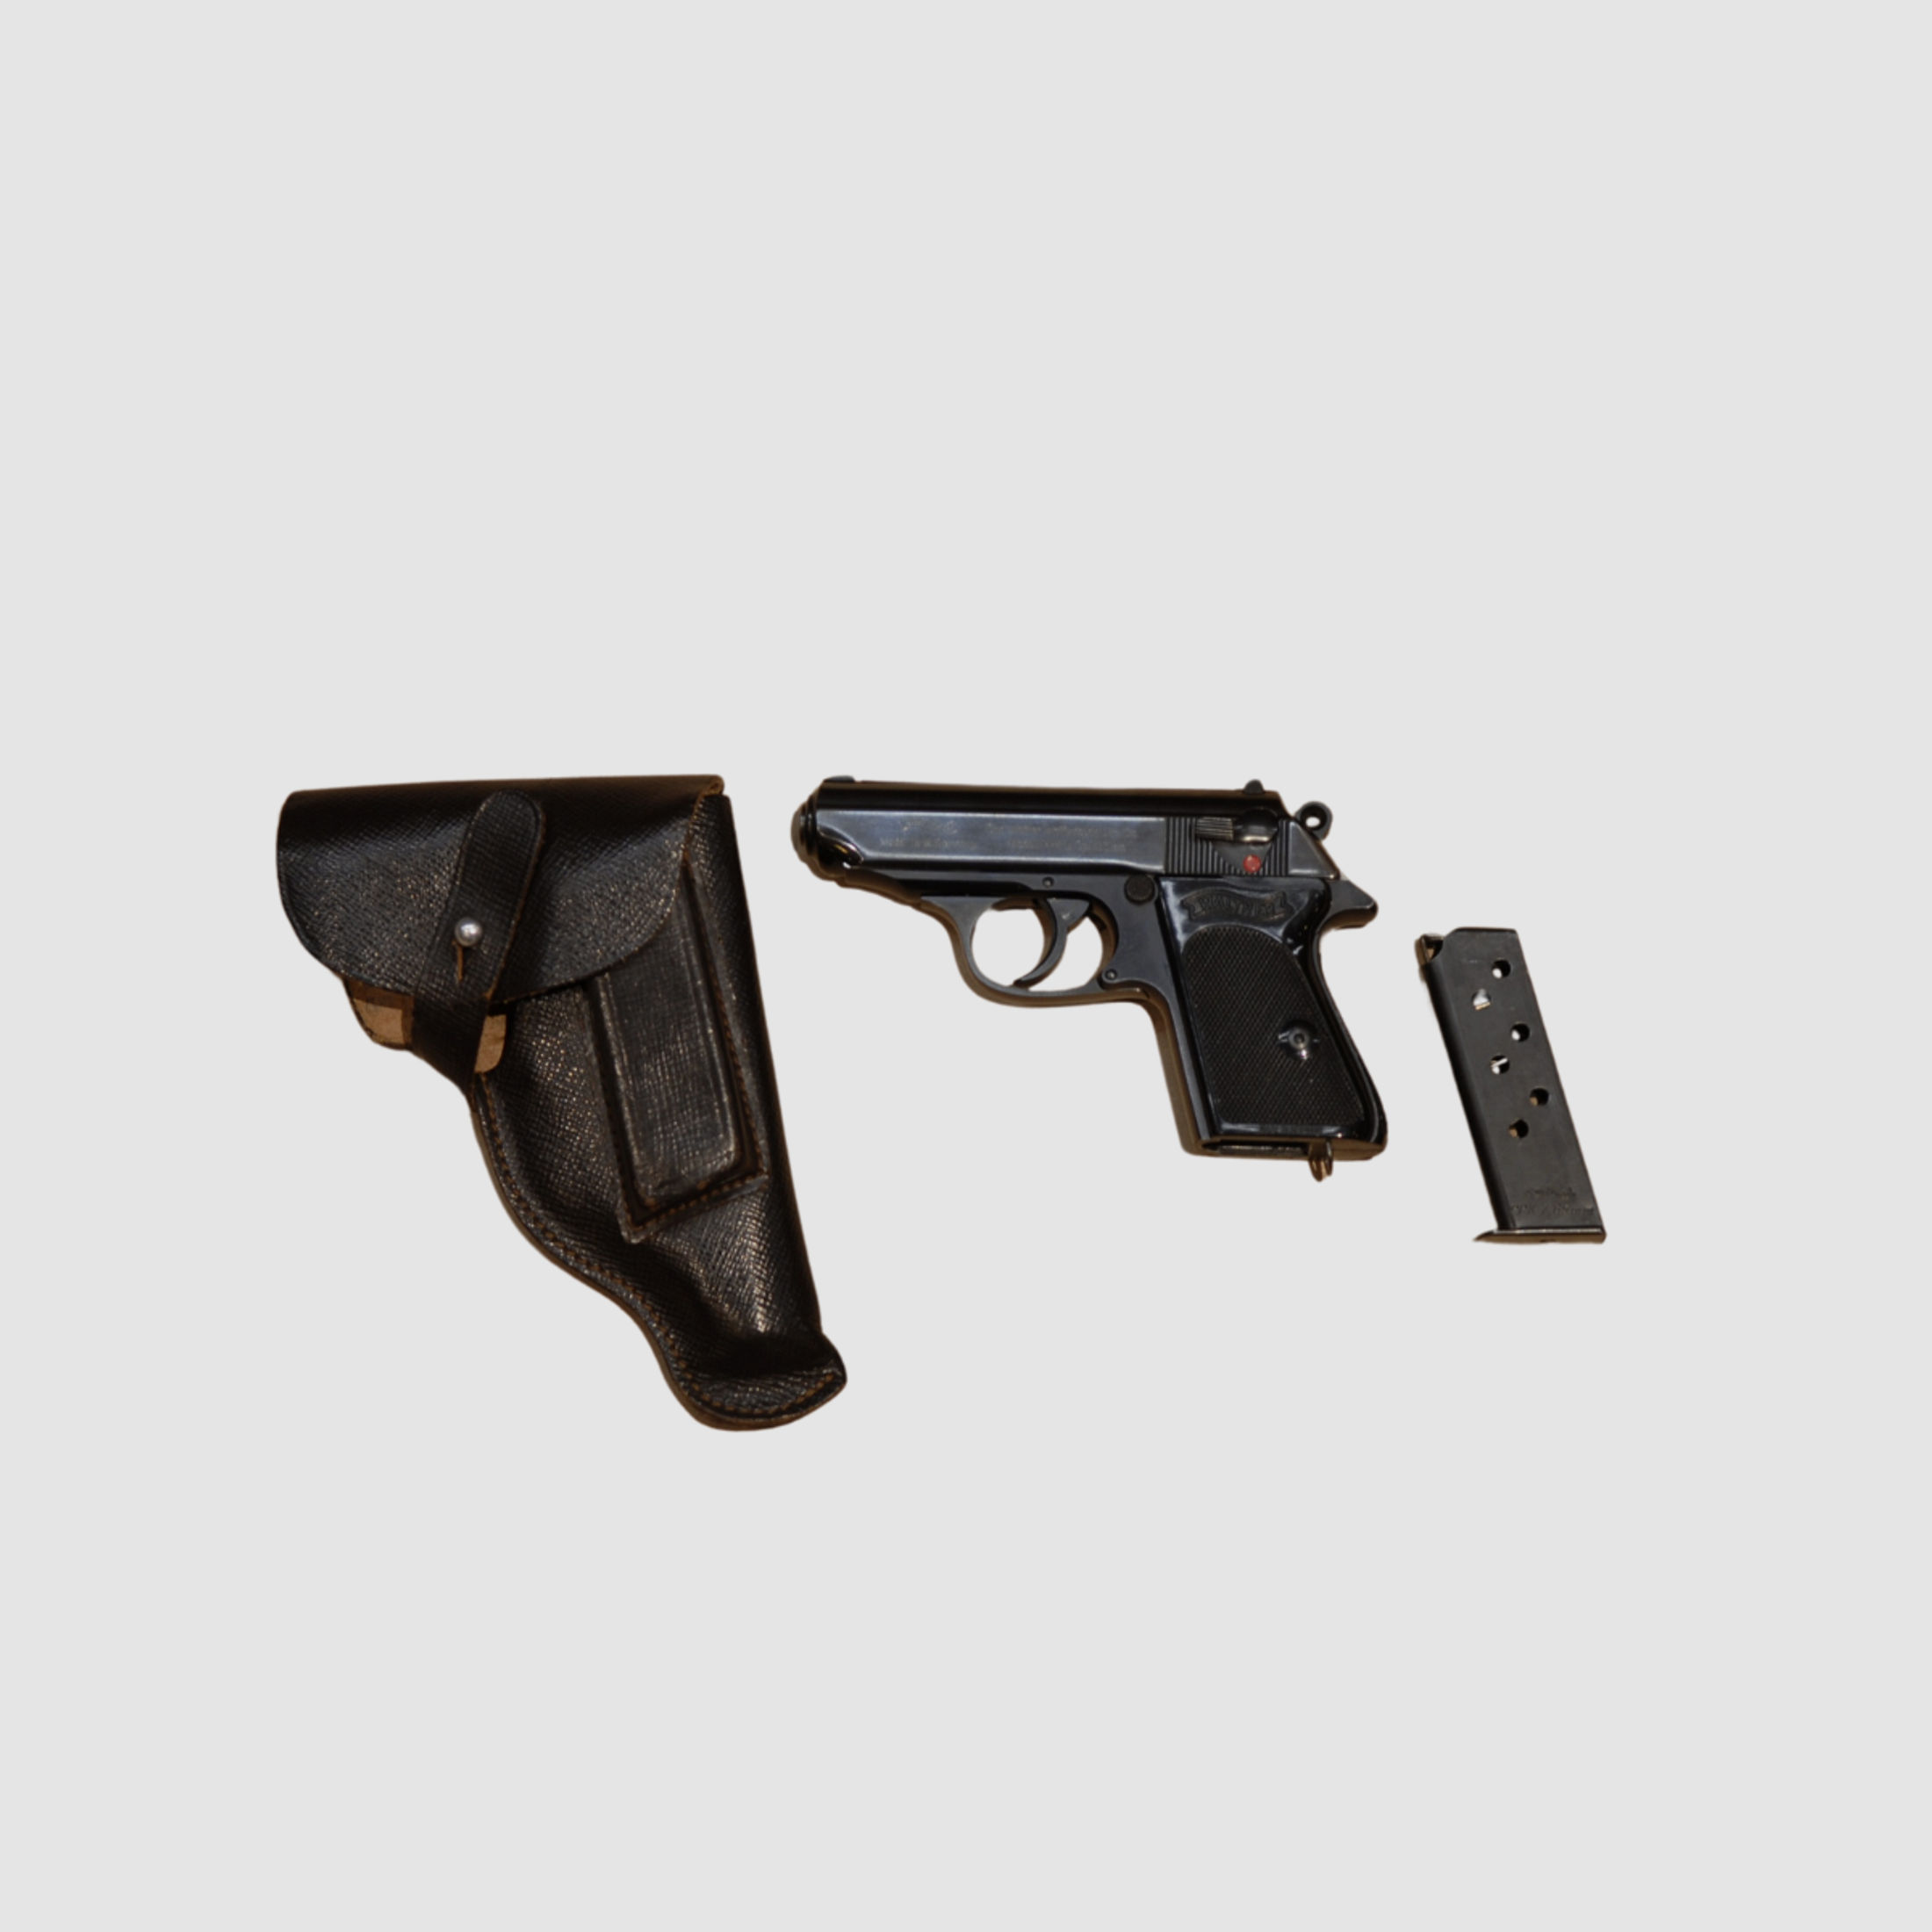 Pistole, Walther PPK, Kal. 7,65mm